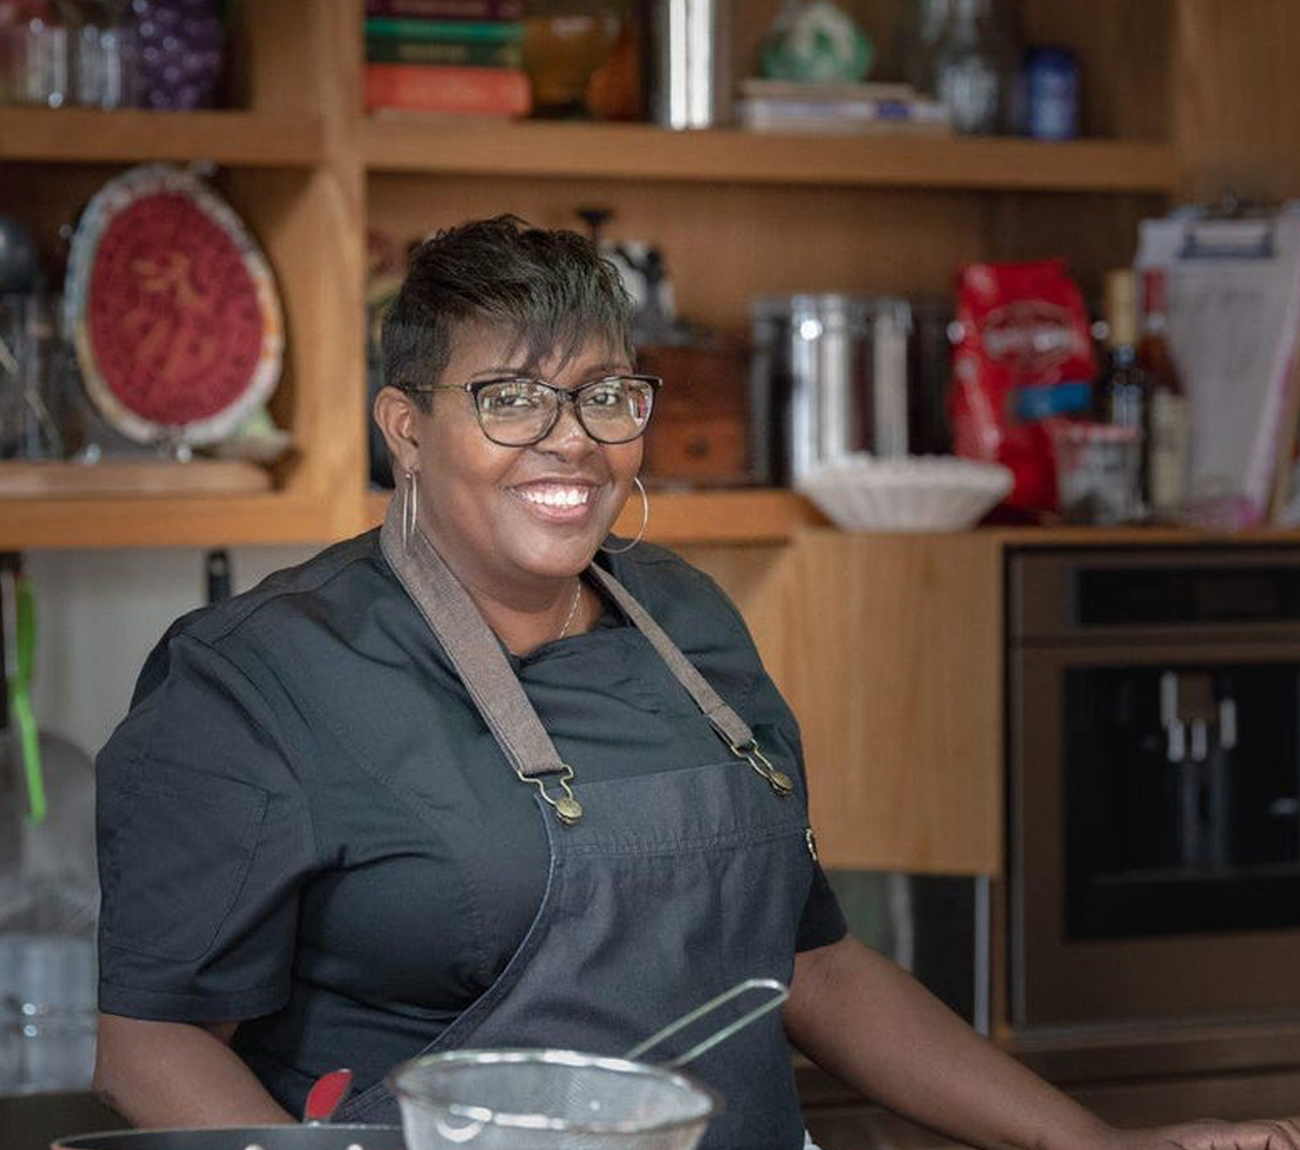 Sharpen Up leadership Chef Airis, the Food Network’s first black female-identifying Chopped champion.